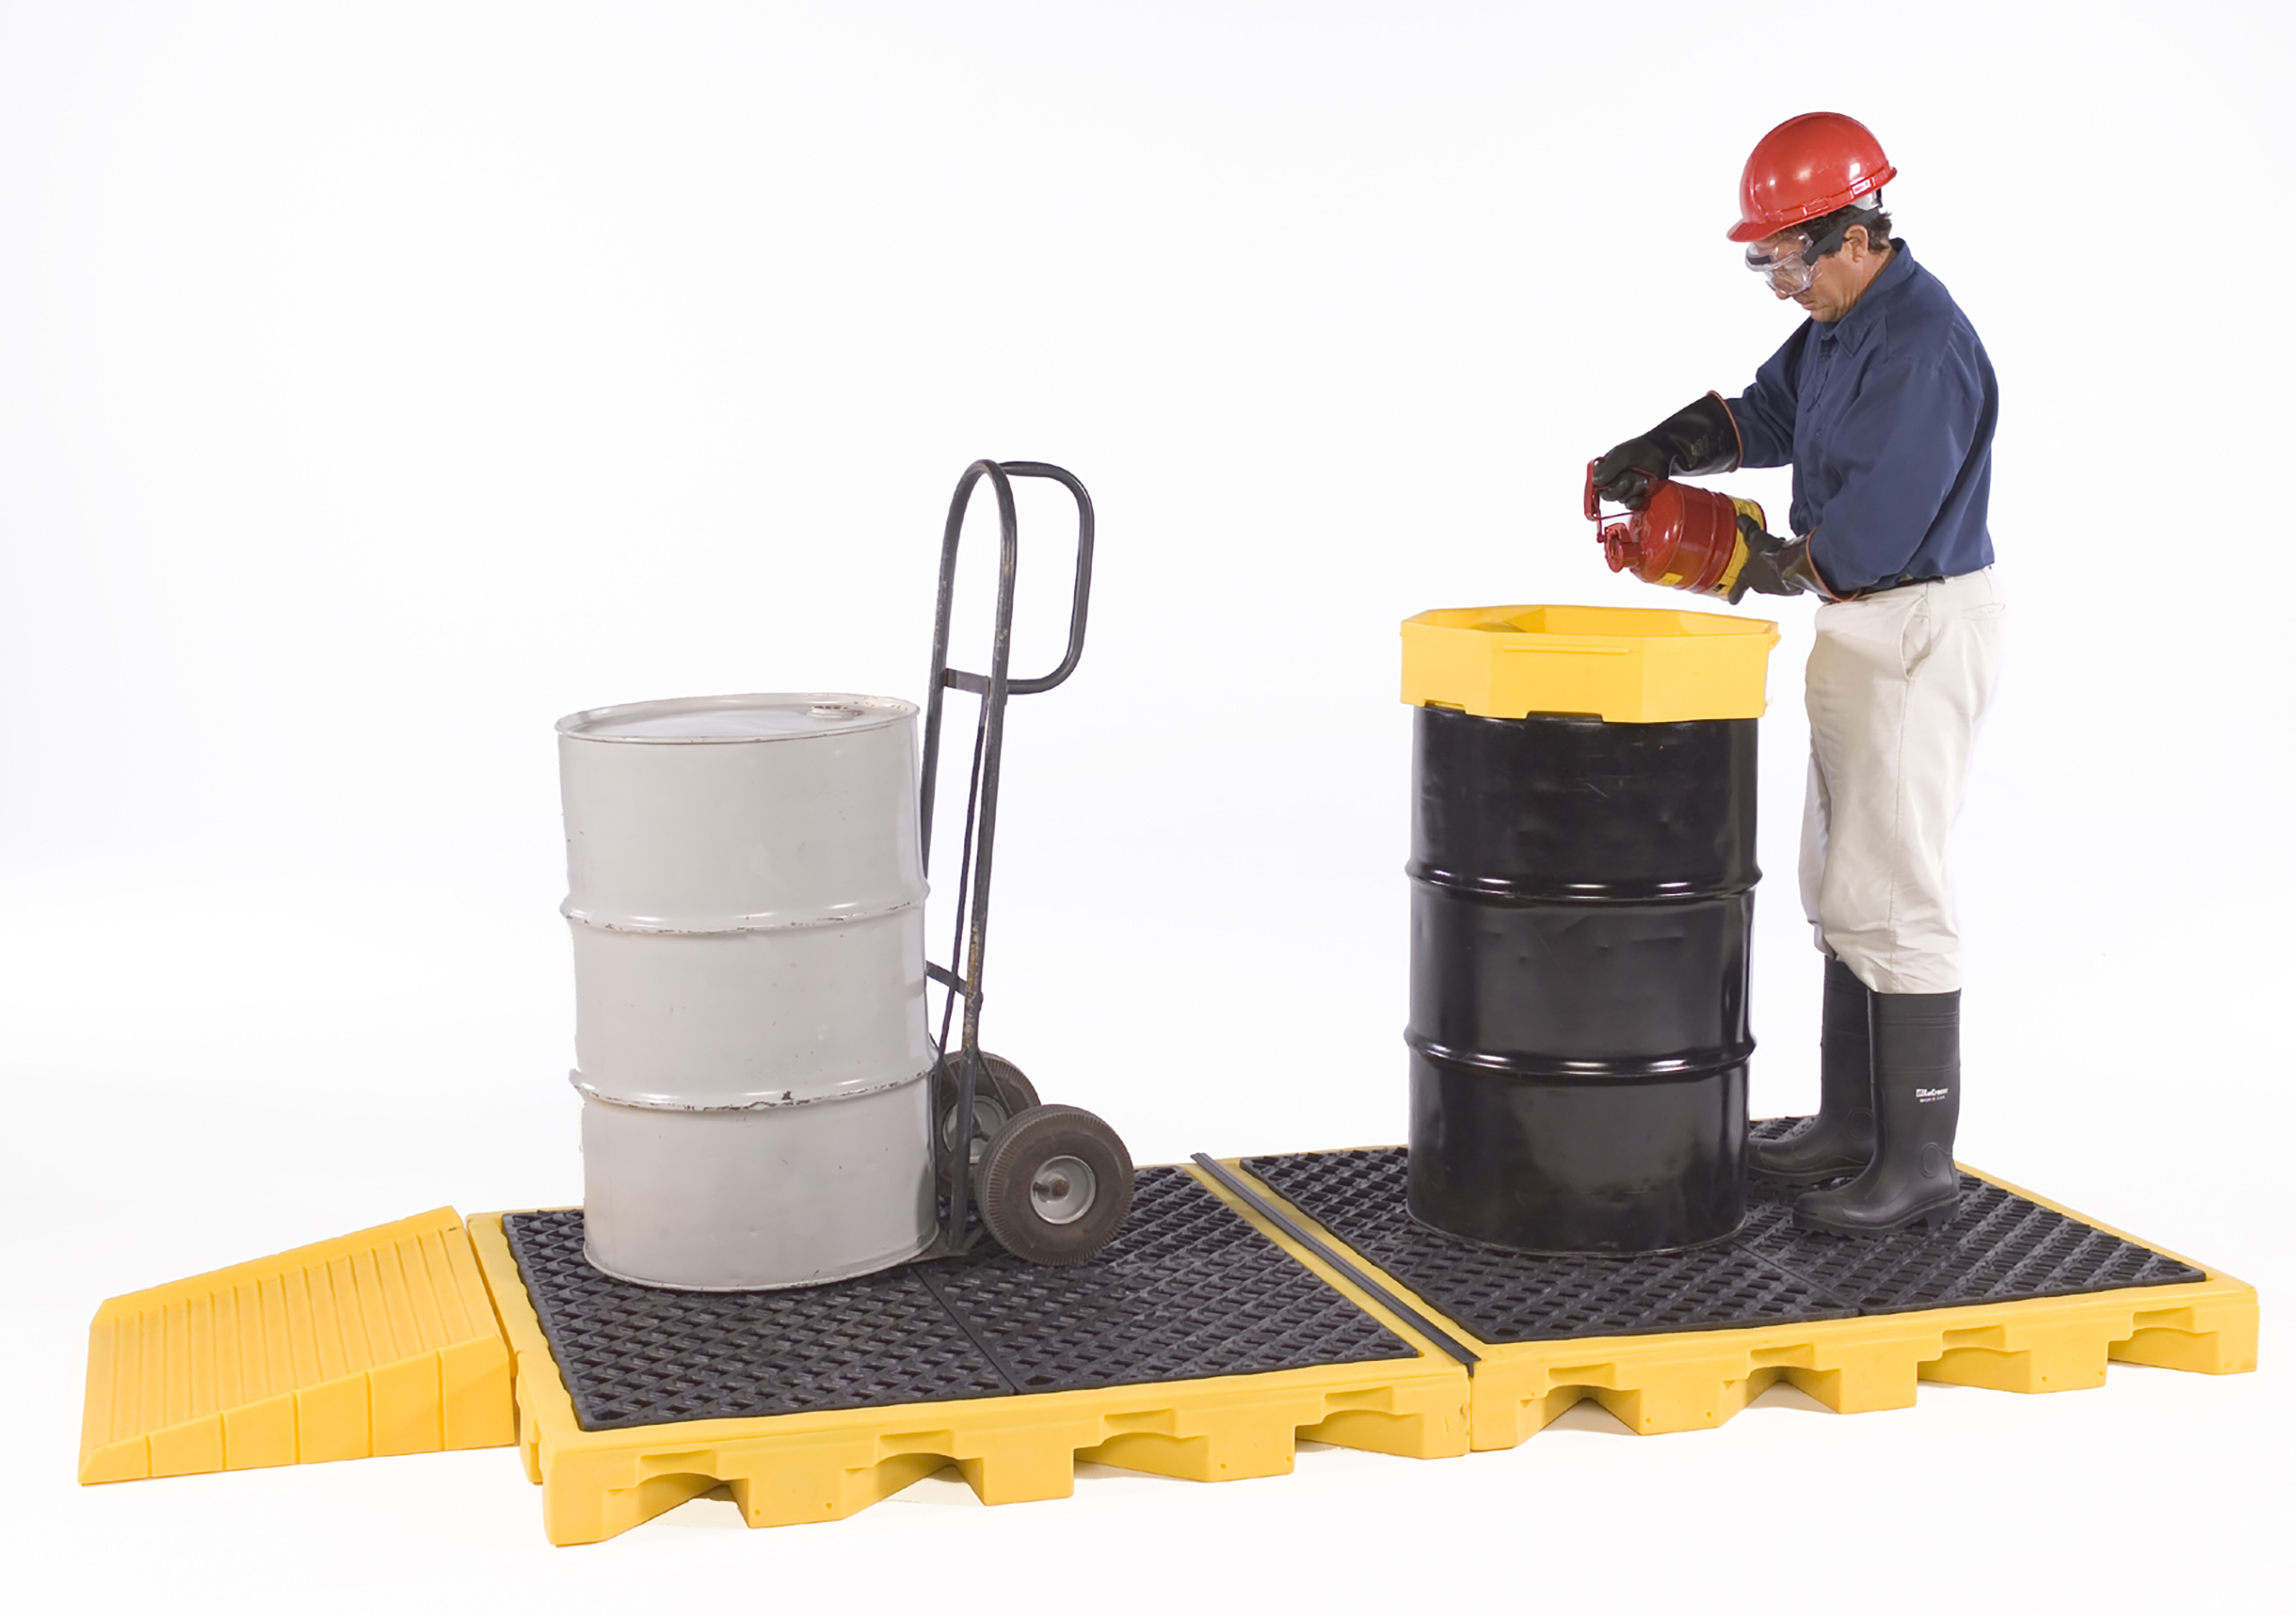 Drums can be loaded and safely stored on spill pallets until needed.